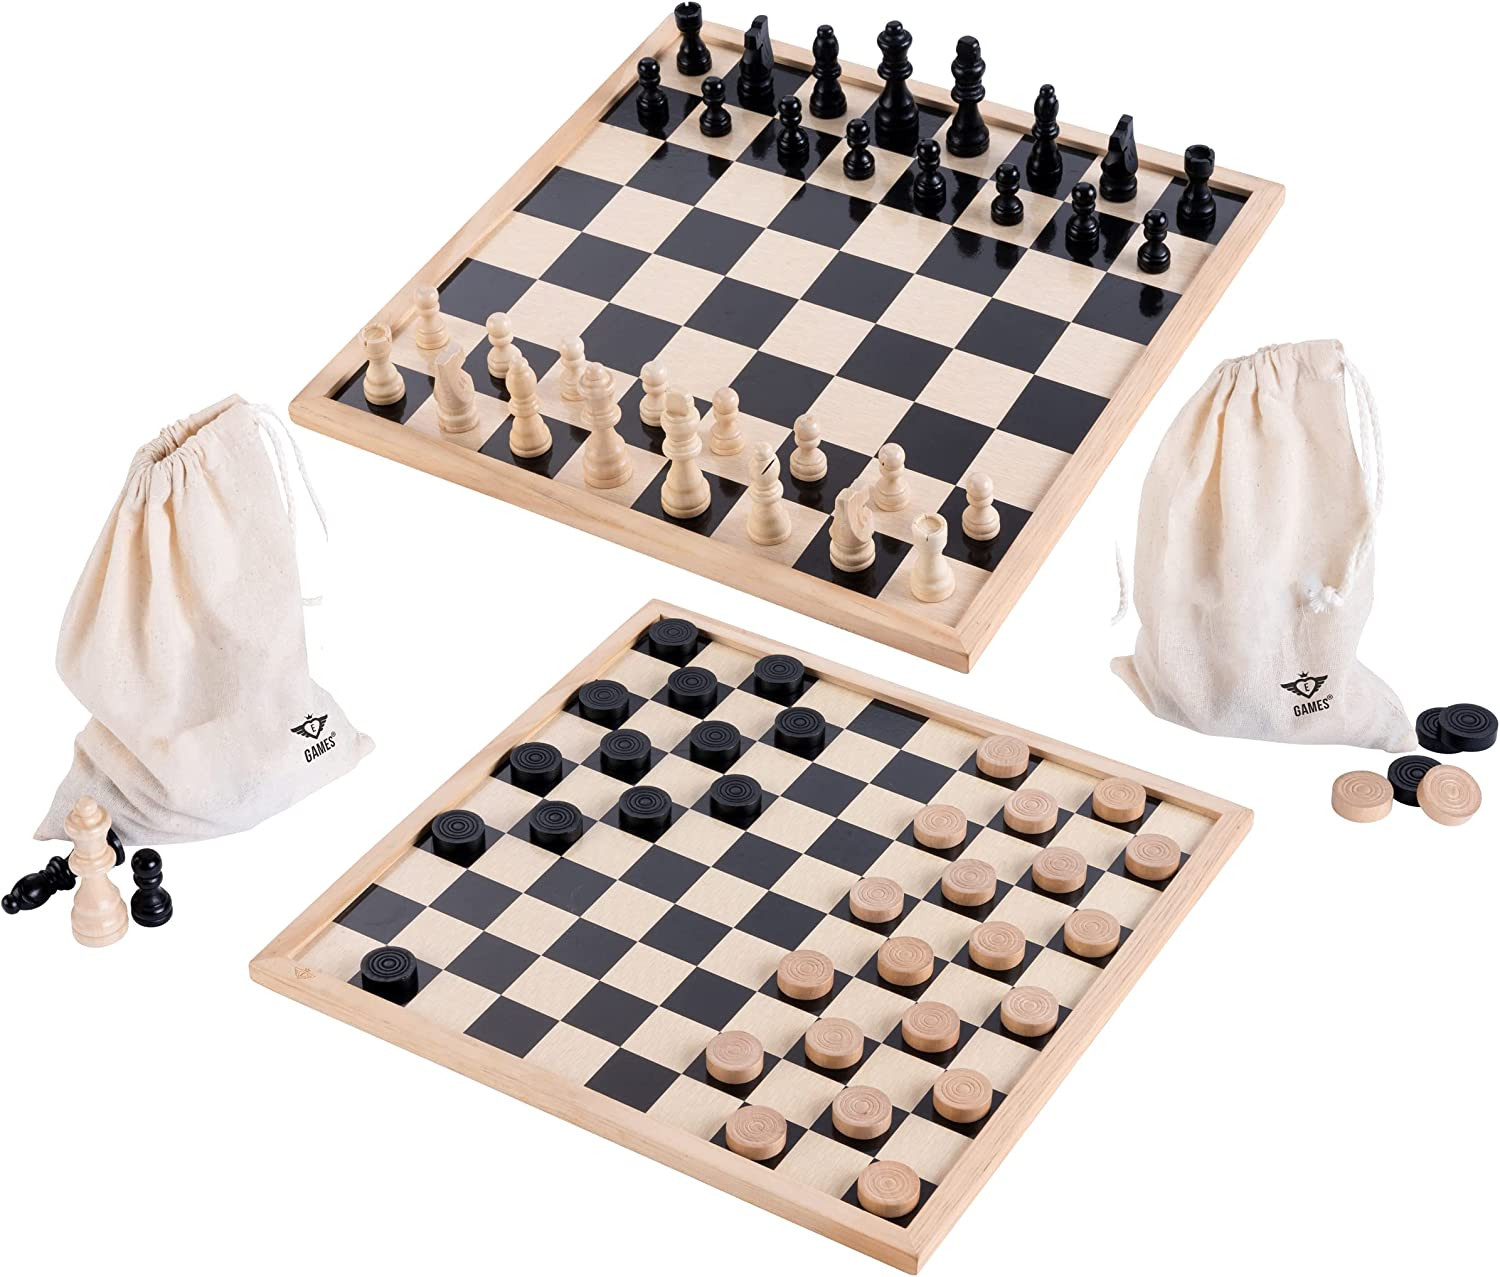 Wooden Chess and Draughts set - 40cm x 40cm